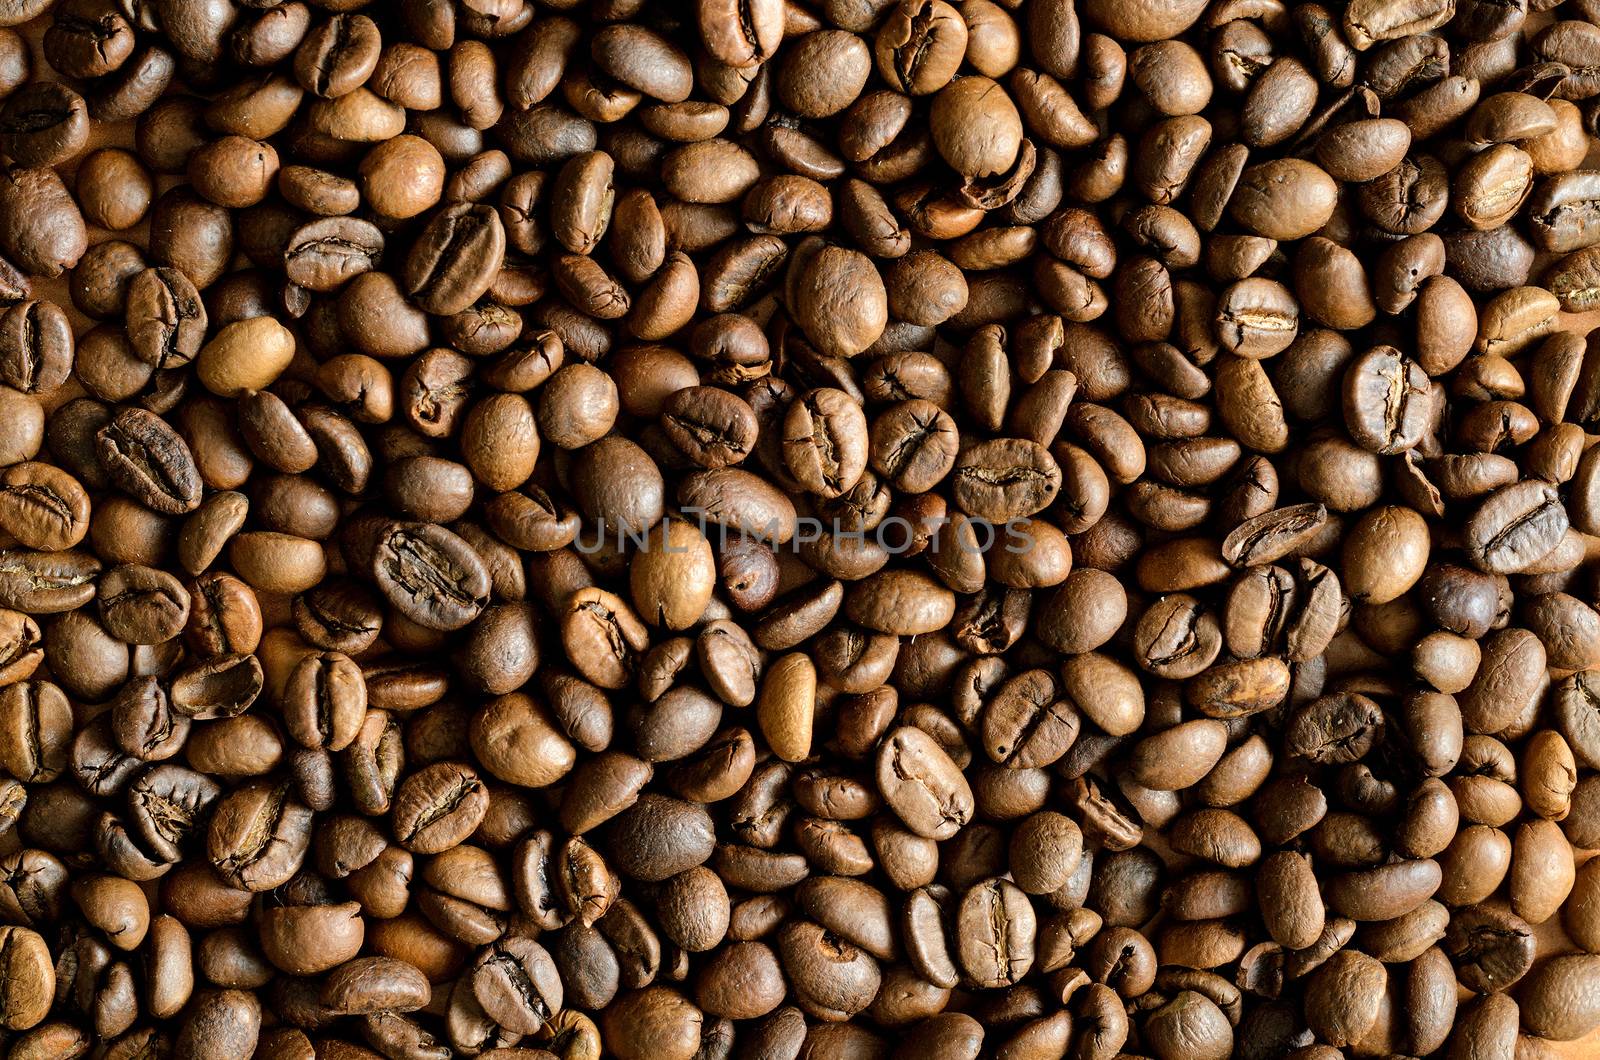 Coffee beans background.Close up.Mixture of different kinds of coffee beans.